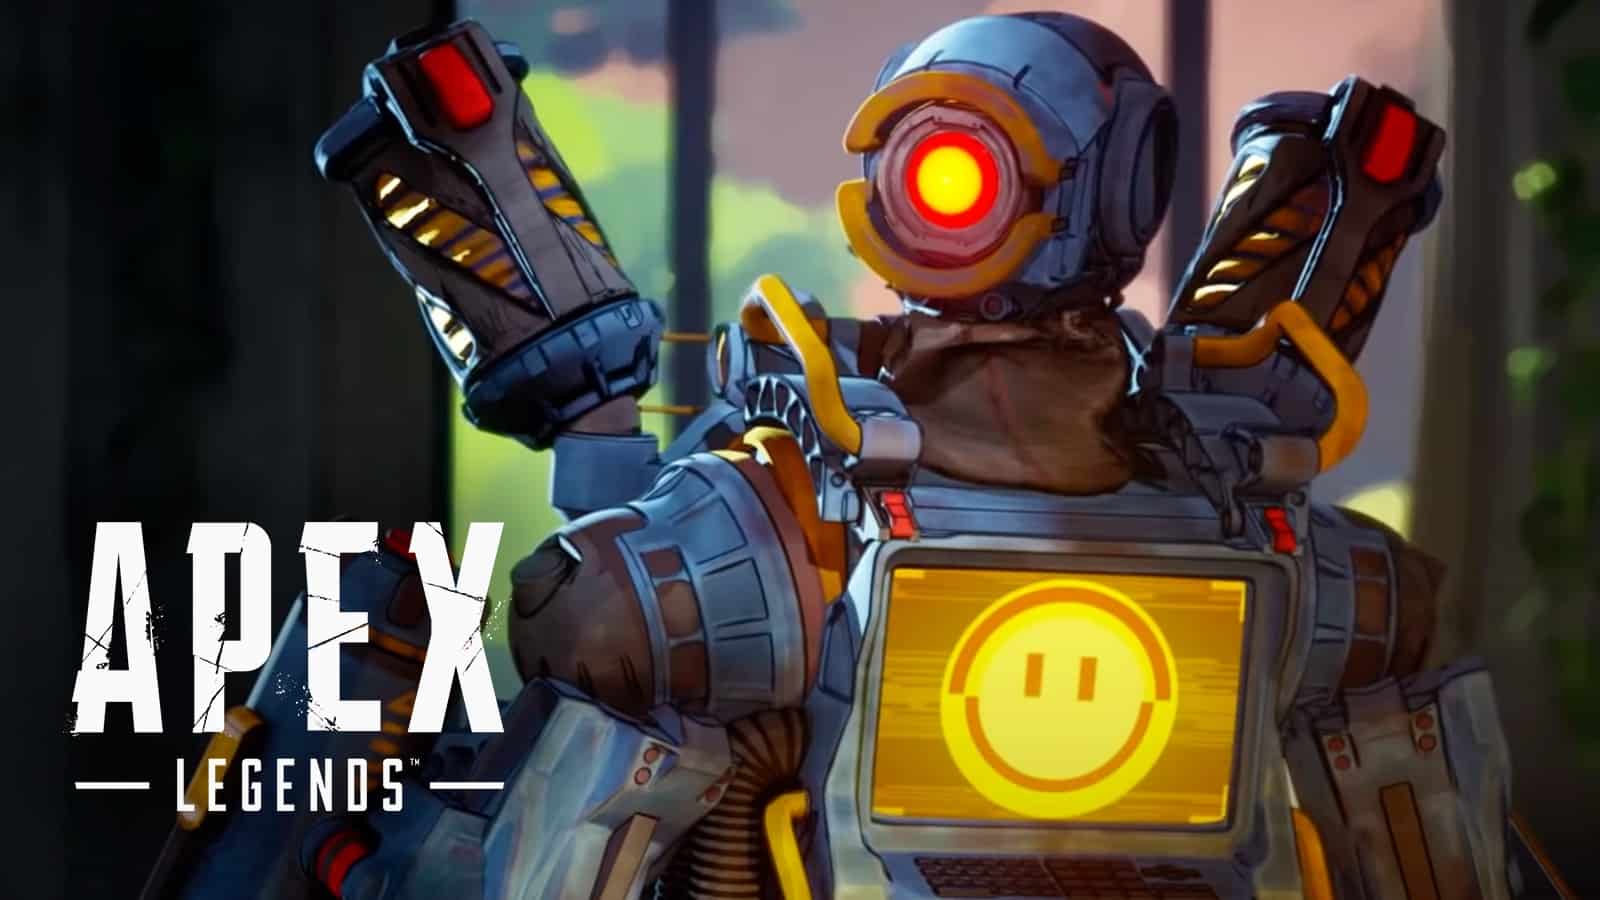 Pathfinder from Apex Legends with a smiley face on his chest display